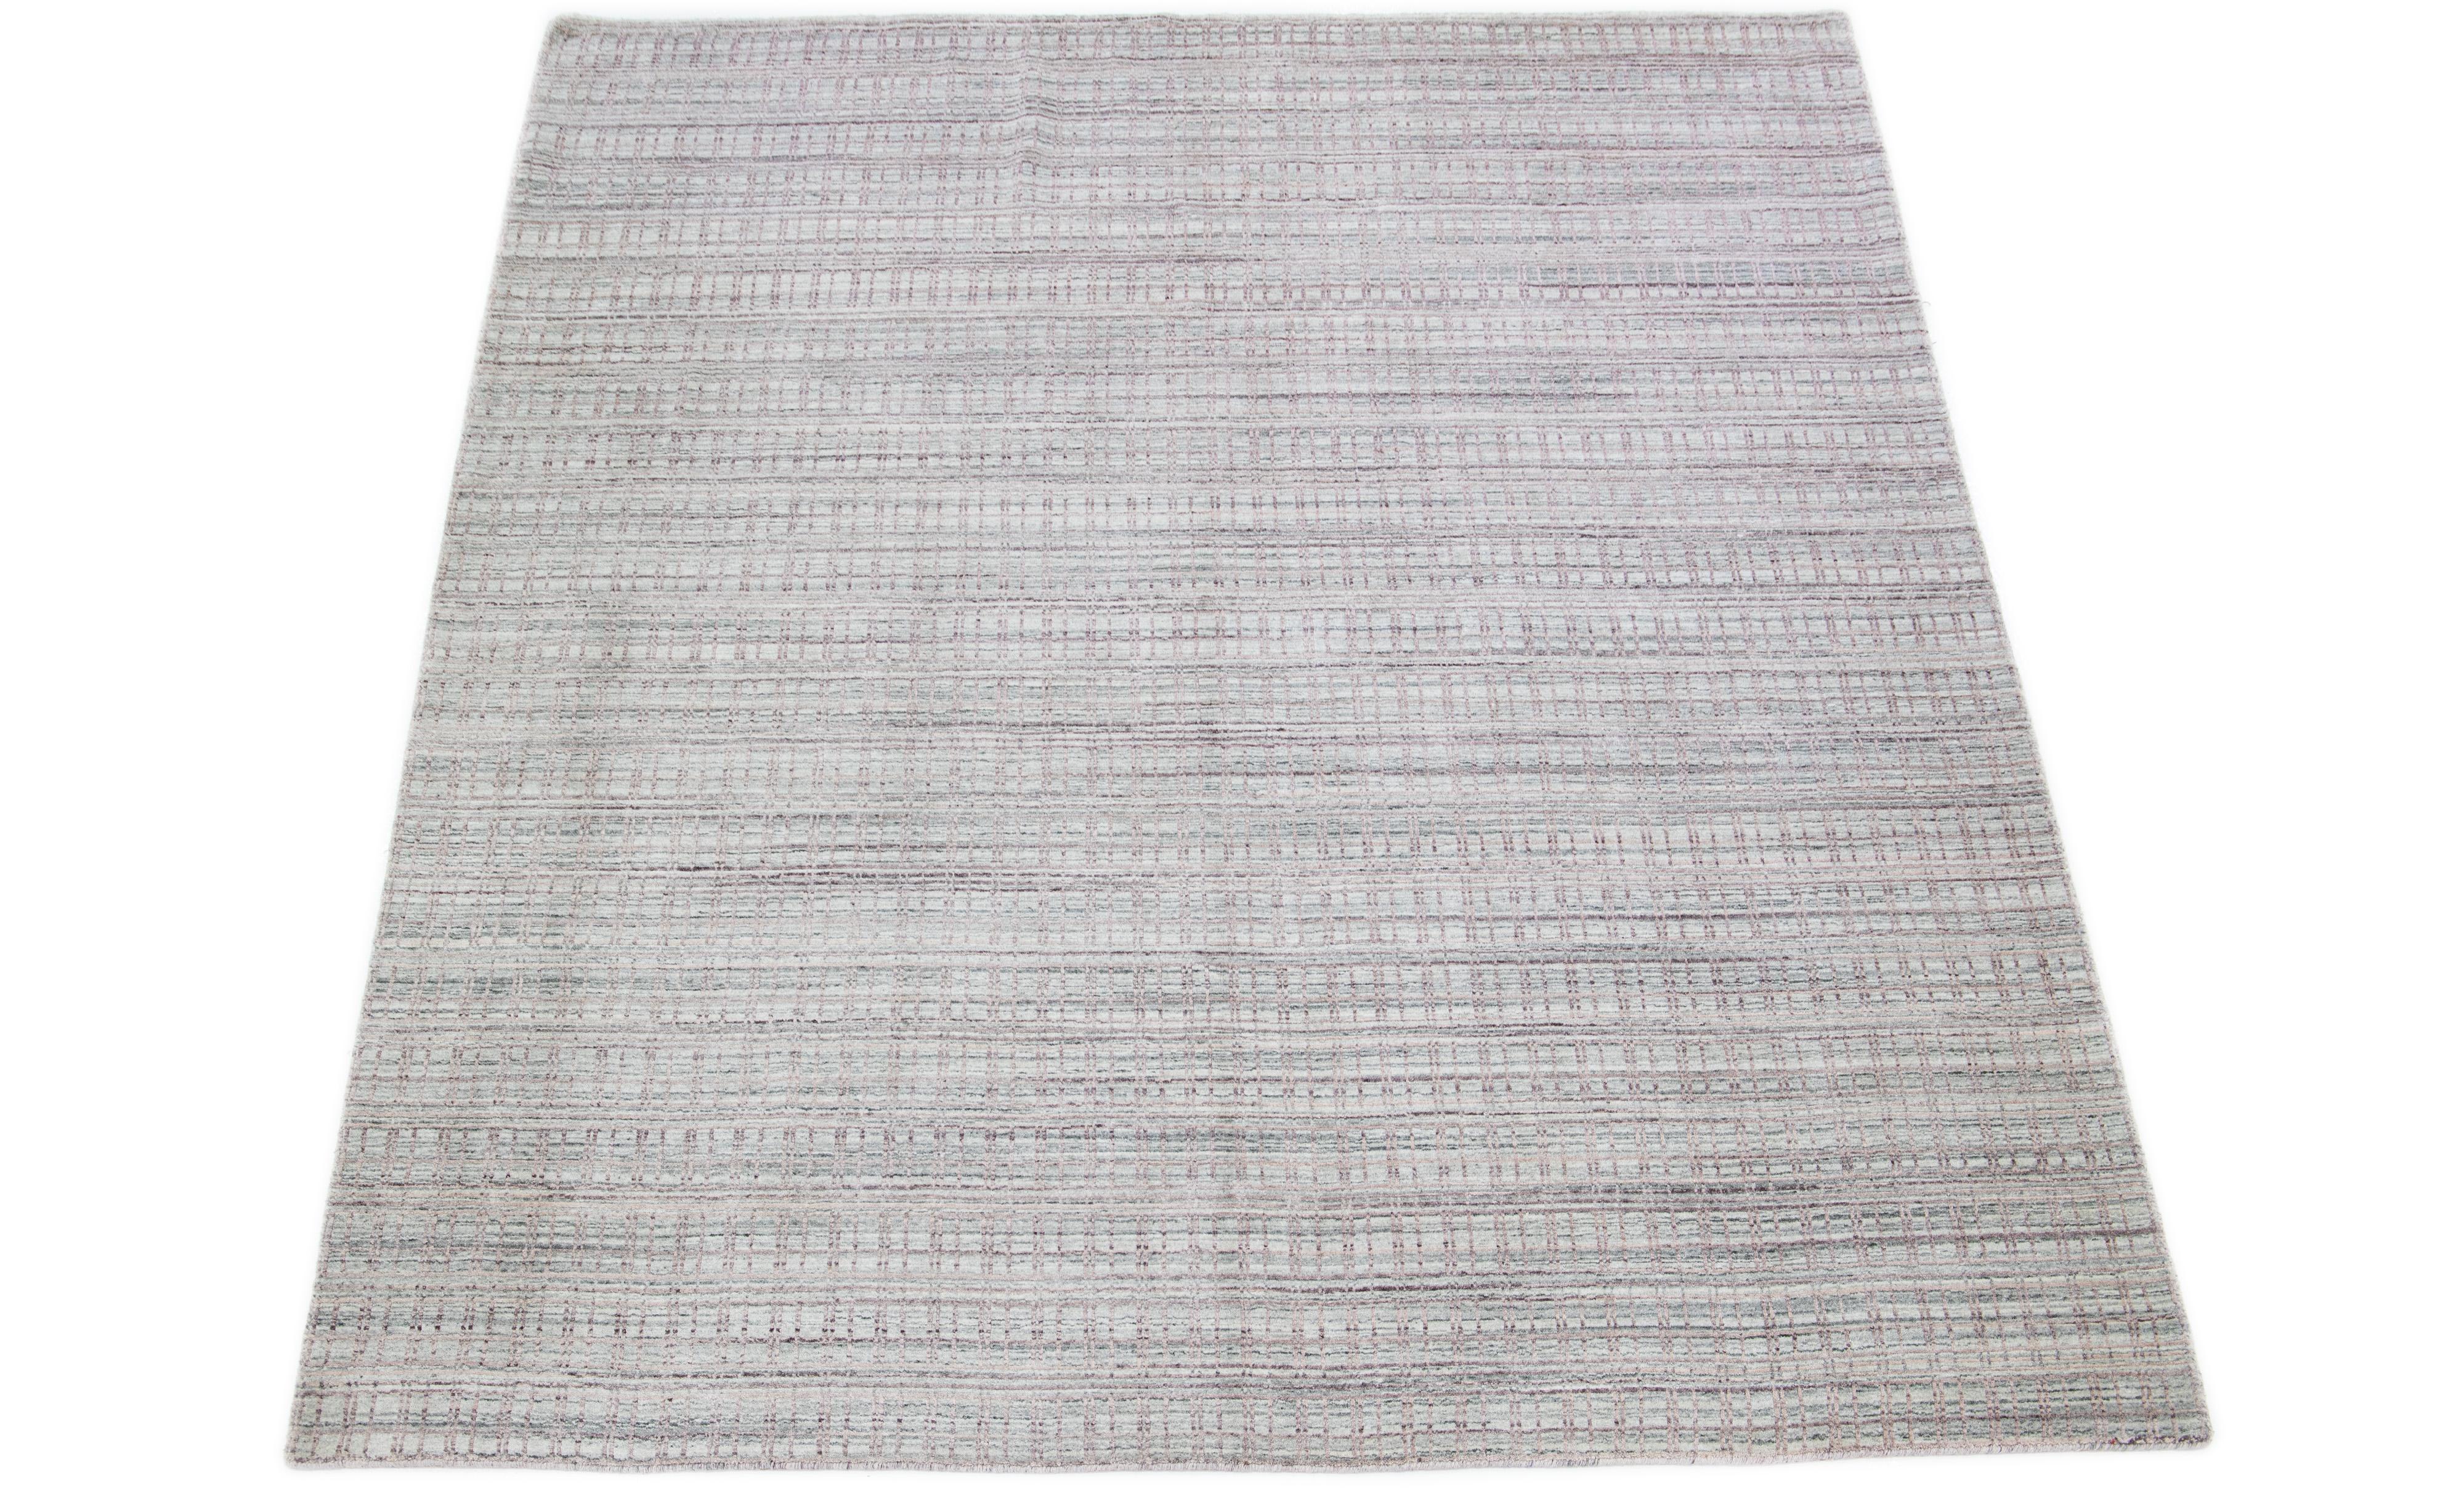 This rug, made from wool and silk, displays an enthralling geometric pattern in pink, expertly embodied over a seductive light gray base tone. 

This rug measures 8'3